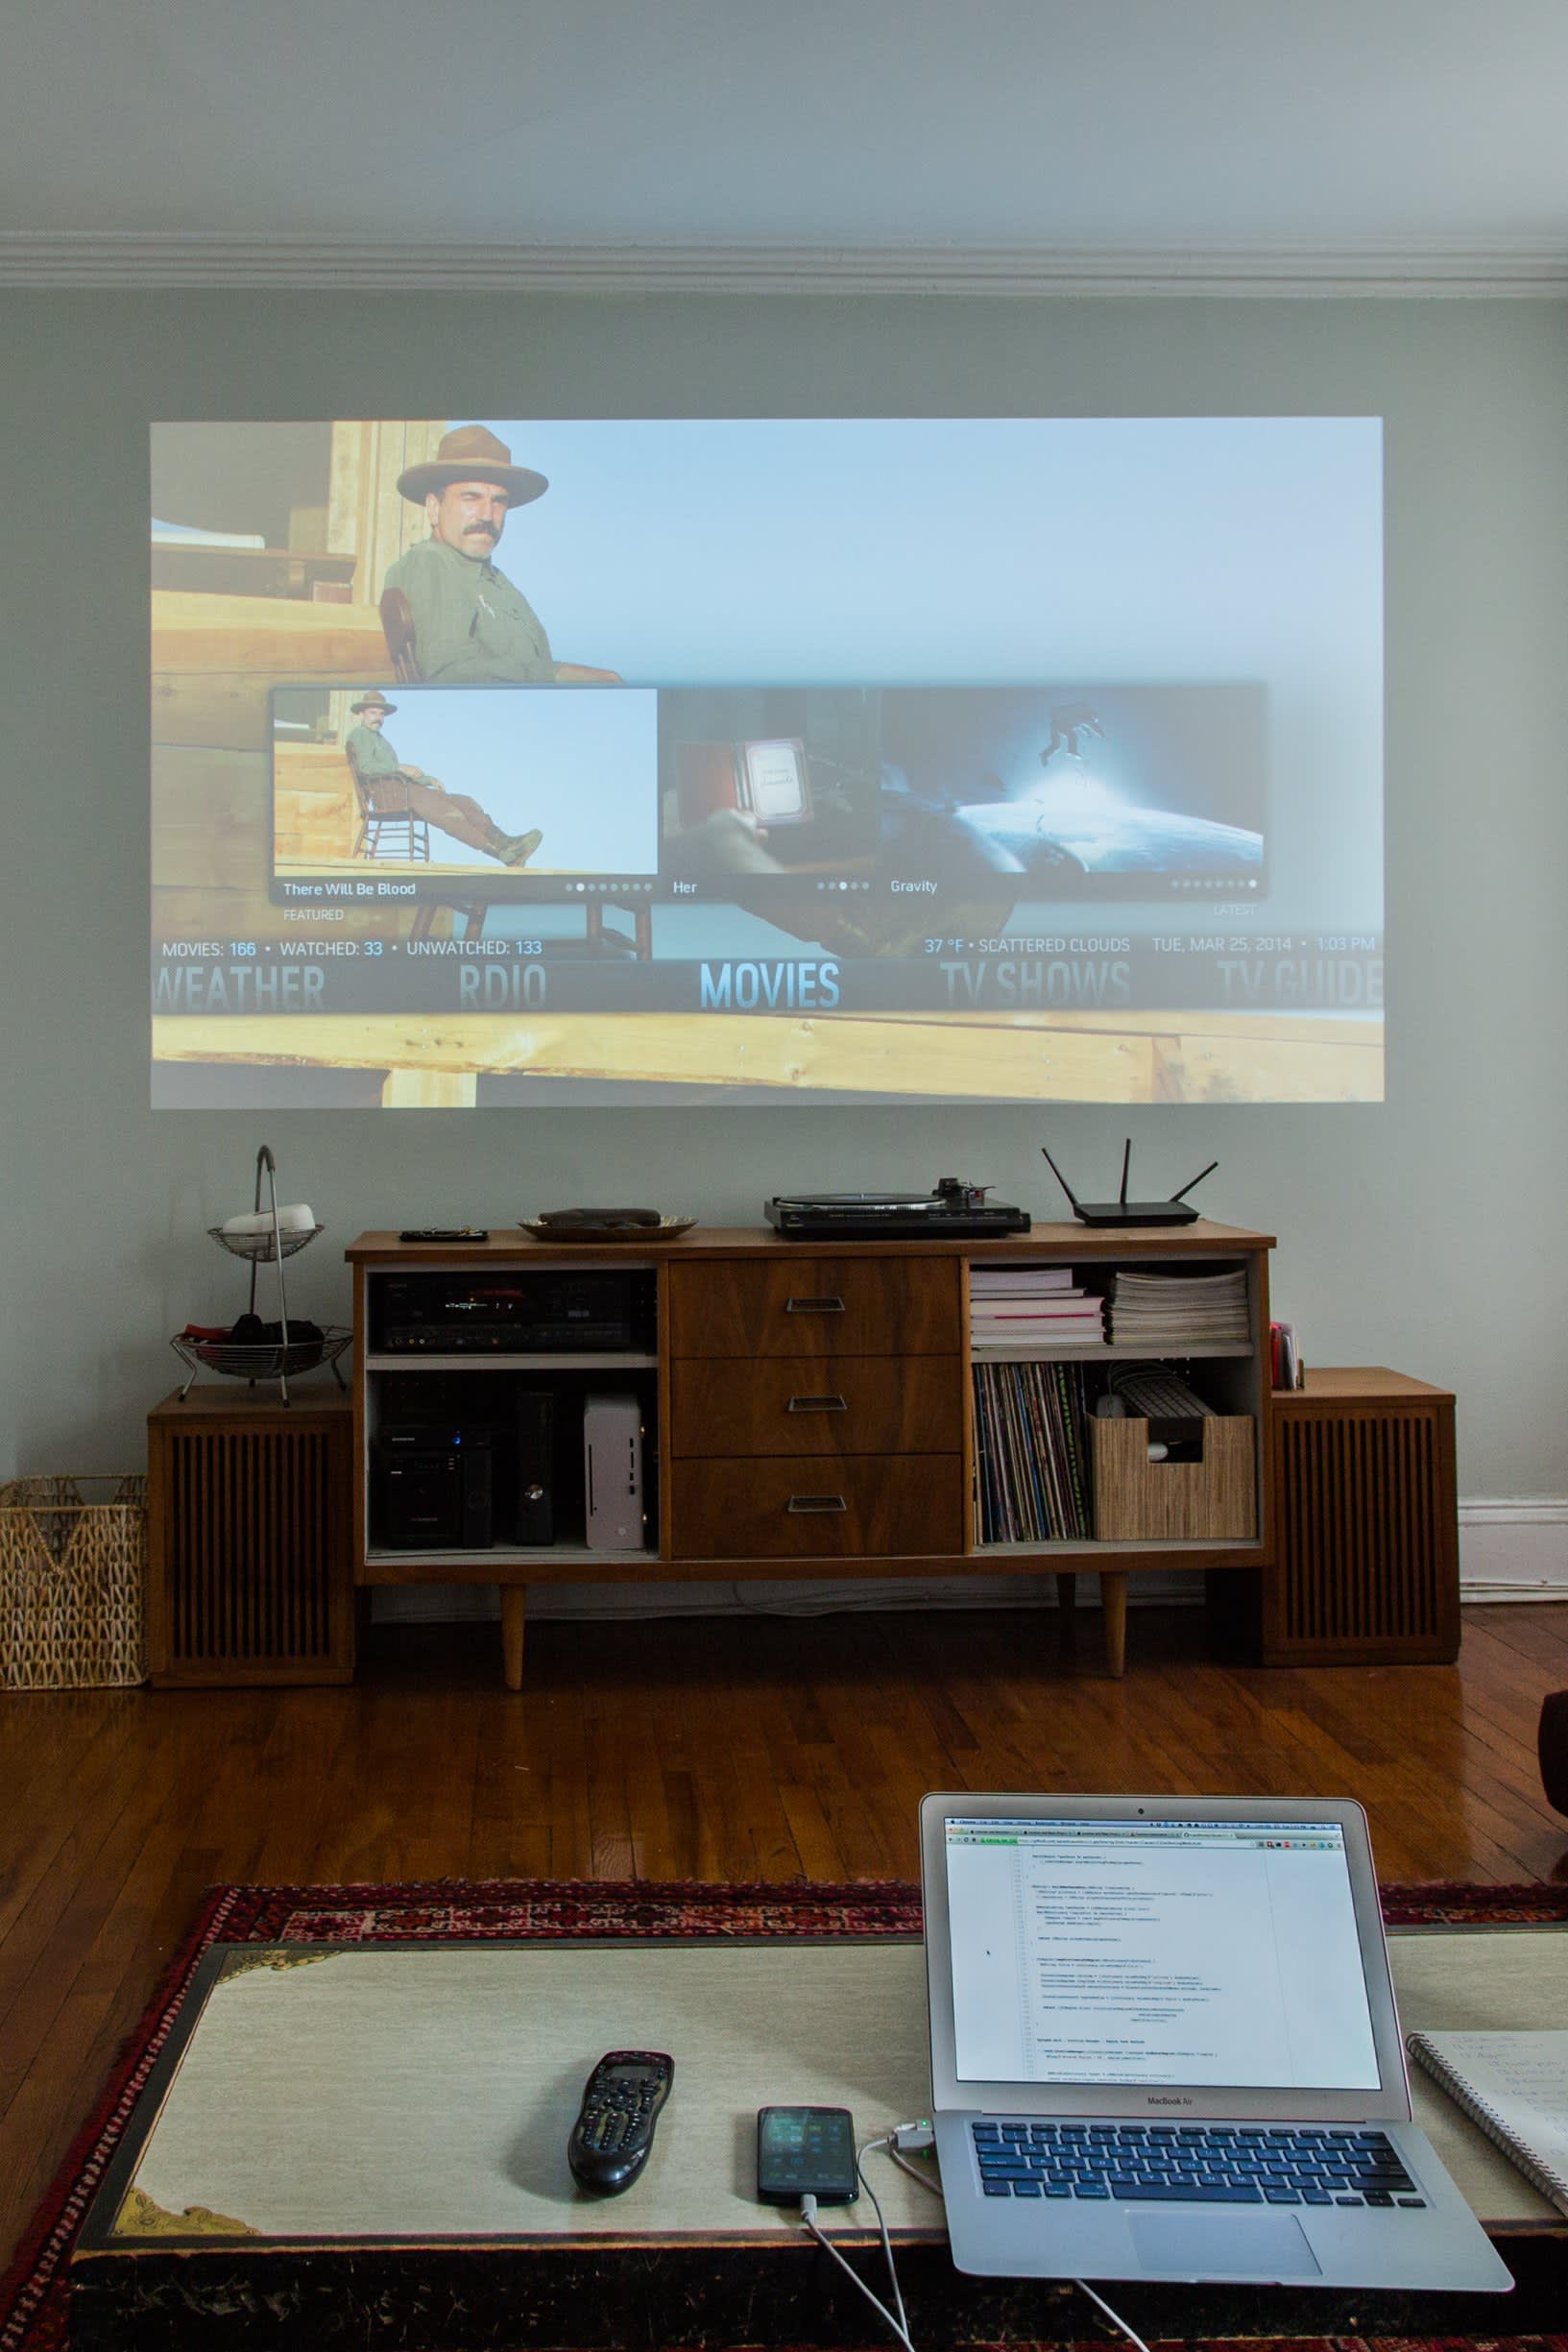 Projector Screen Paint: Does it work? - Projector1